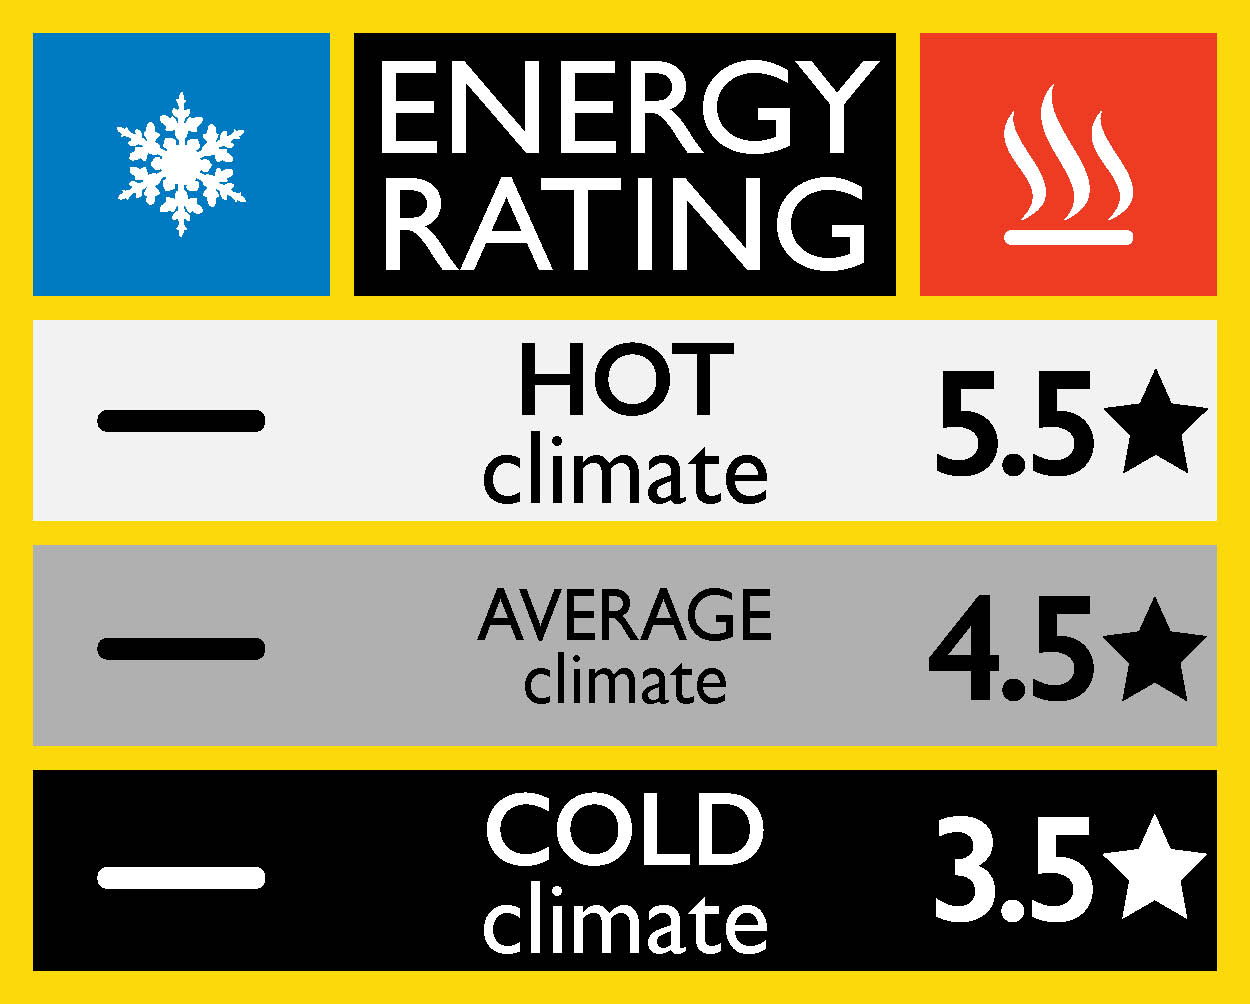 Example of star rating label for seer heating star rating